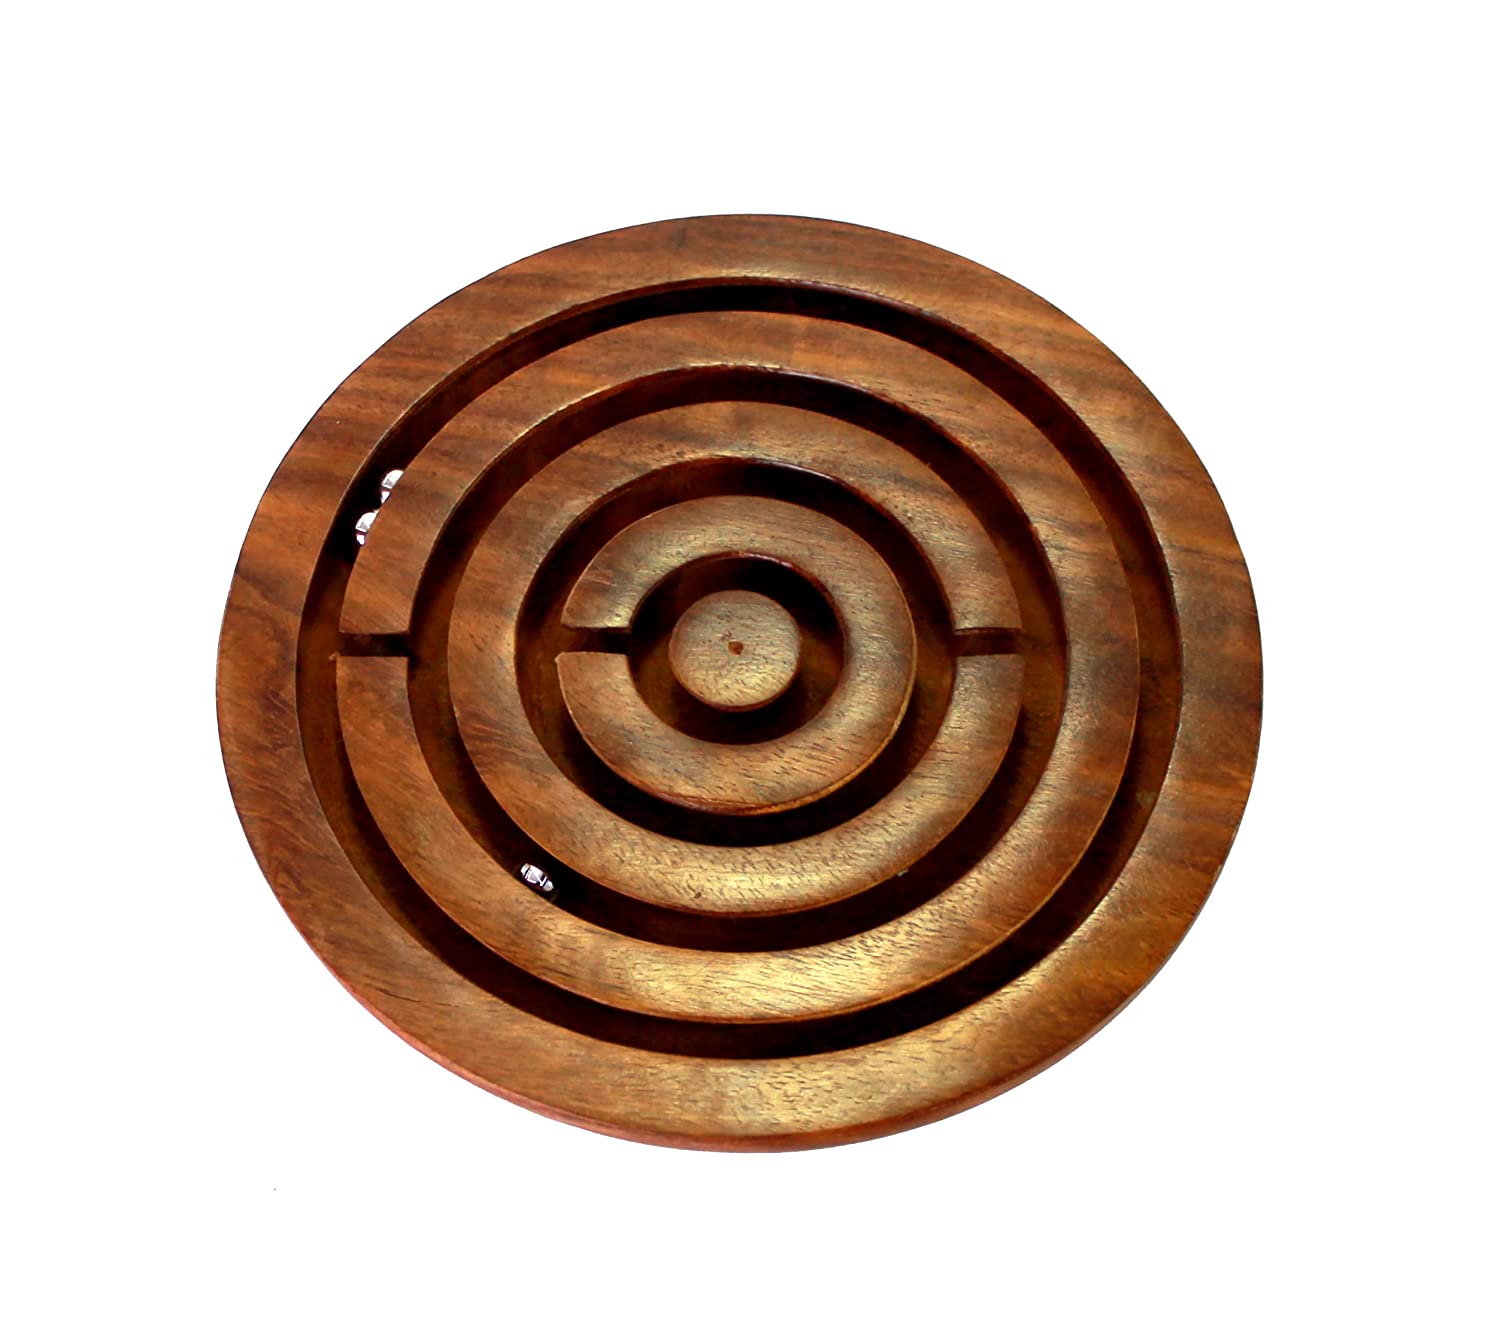 Wooden Labyrinth handmade Board Game Ball in Maze Puzzle